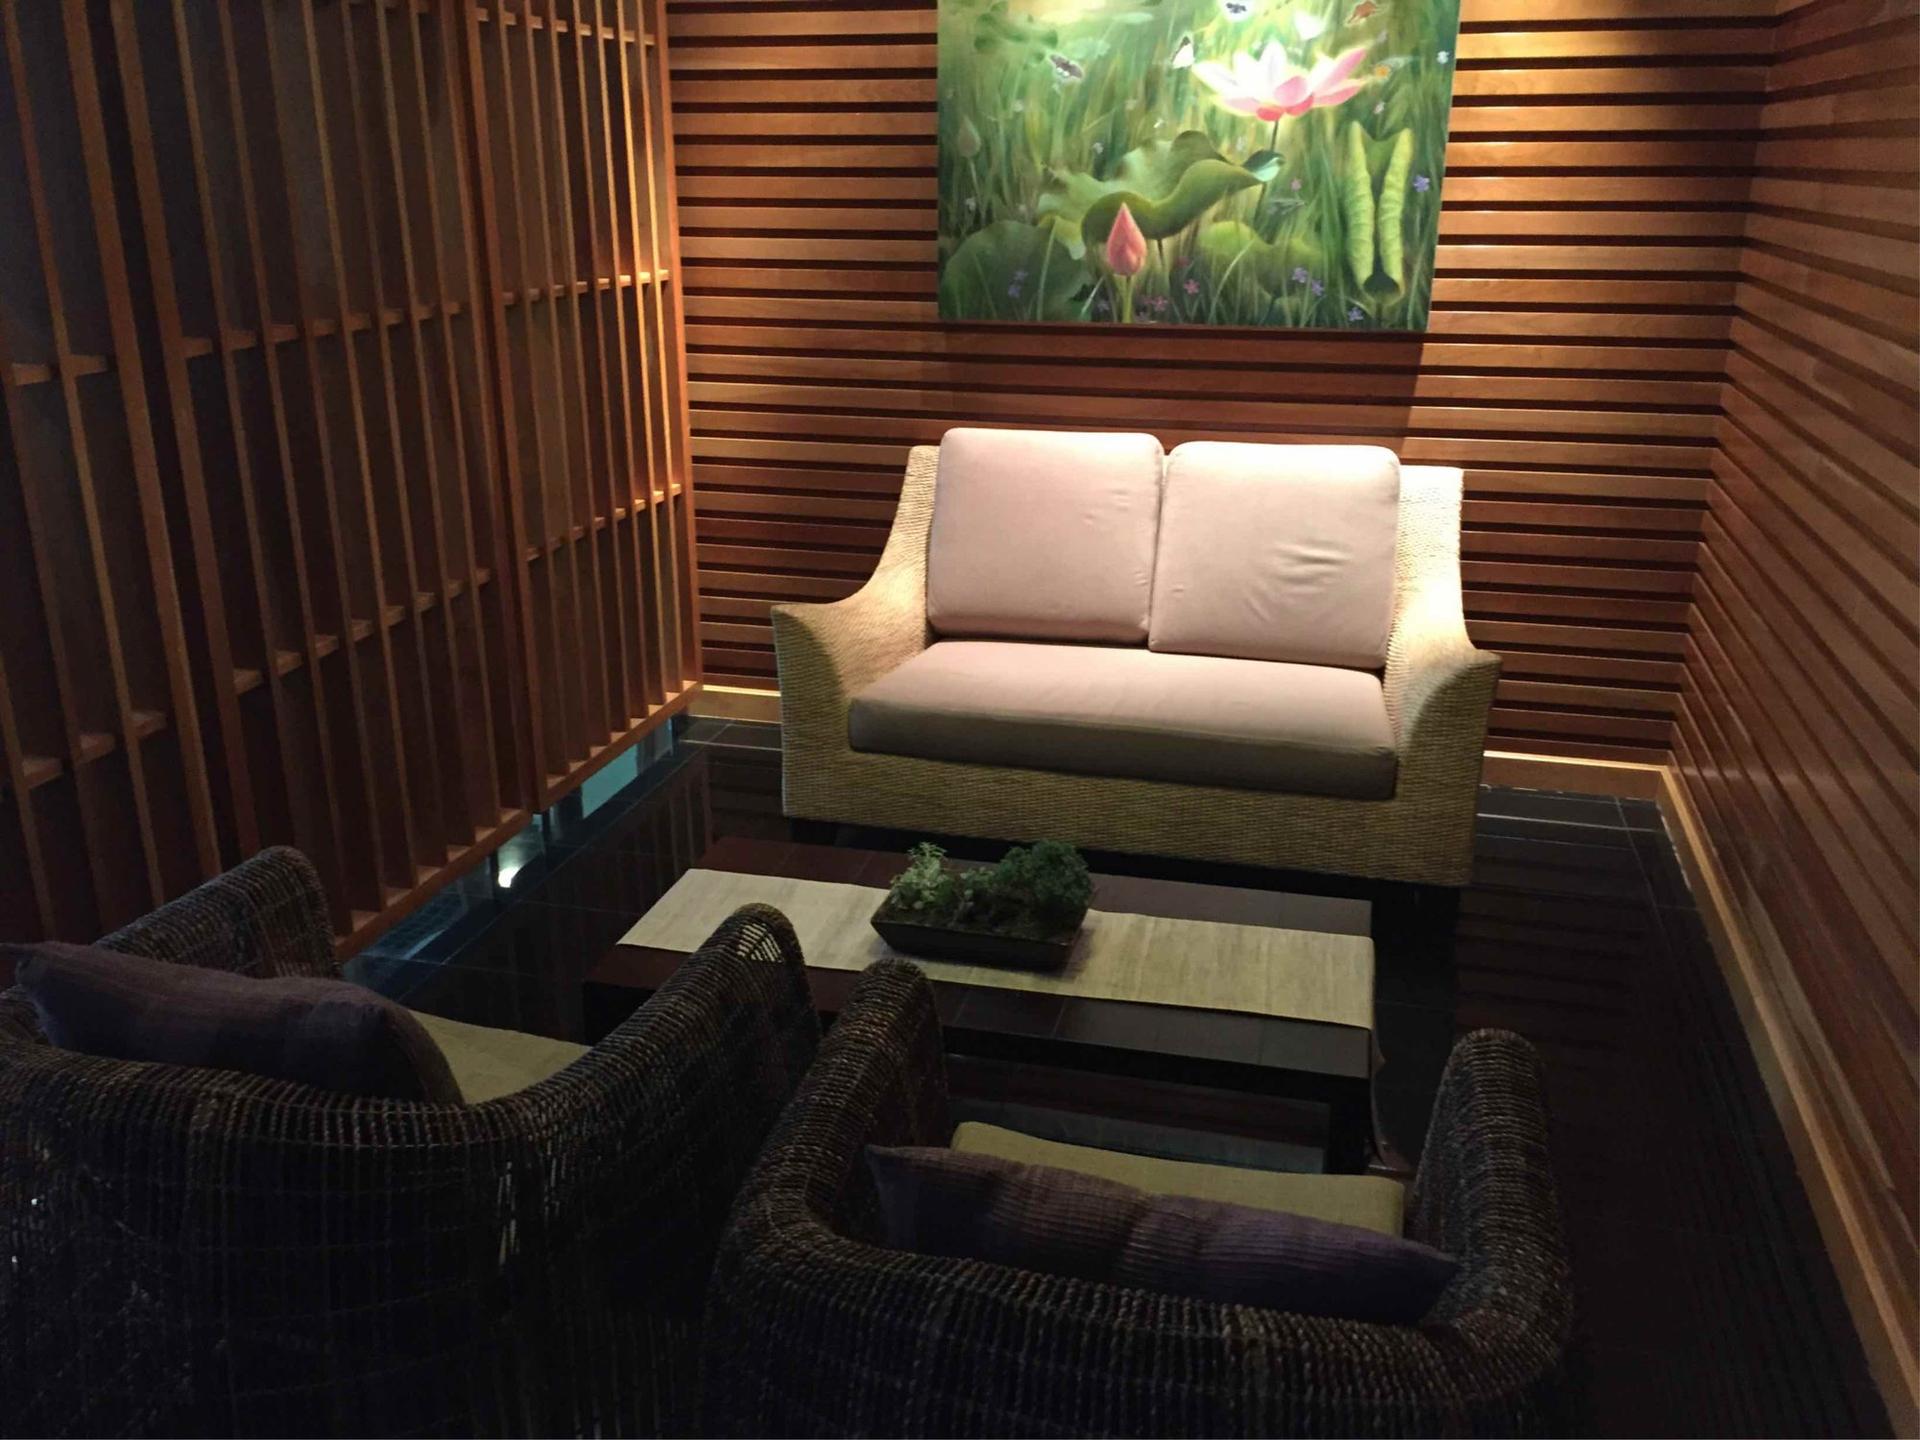 Thai Airways Royal Orchid Spa  image 17 of 25